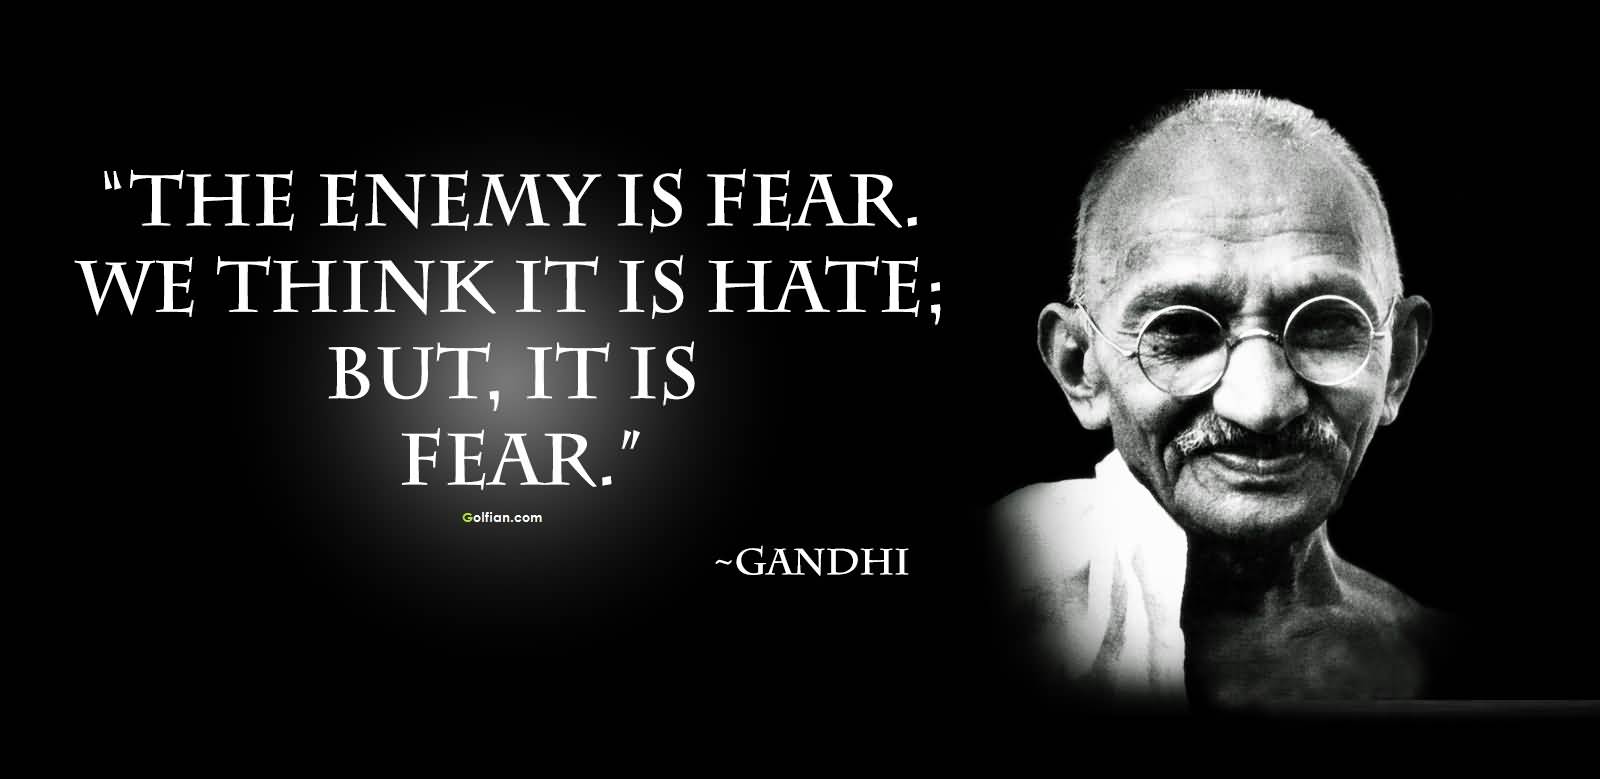 The enemy is fear. We think it is hate; but it is really fear. Gandhi